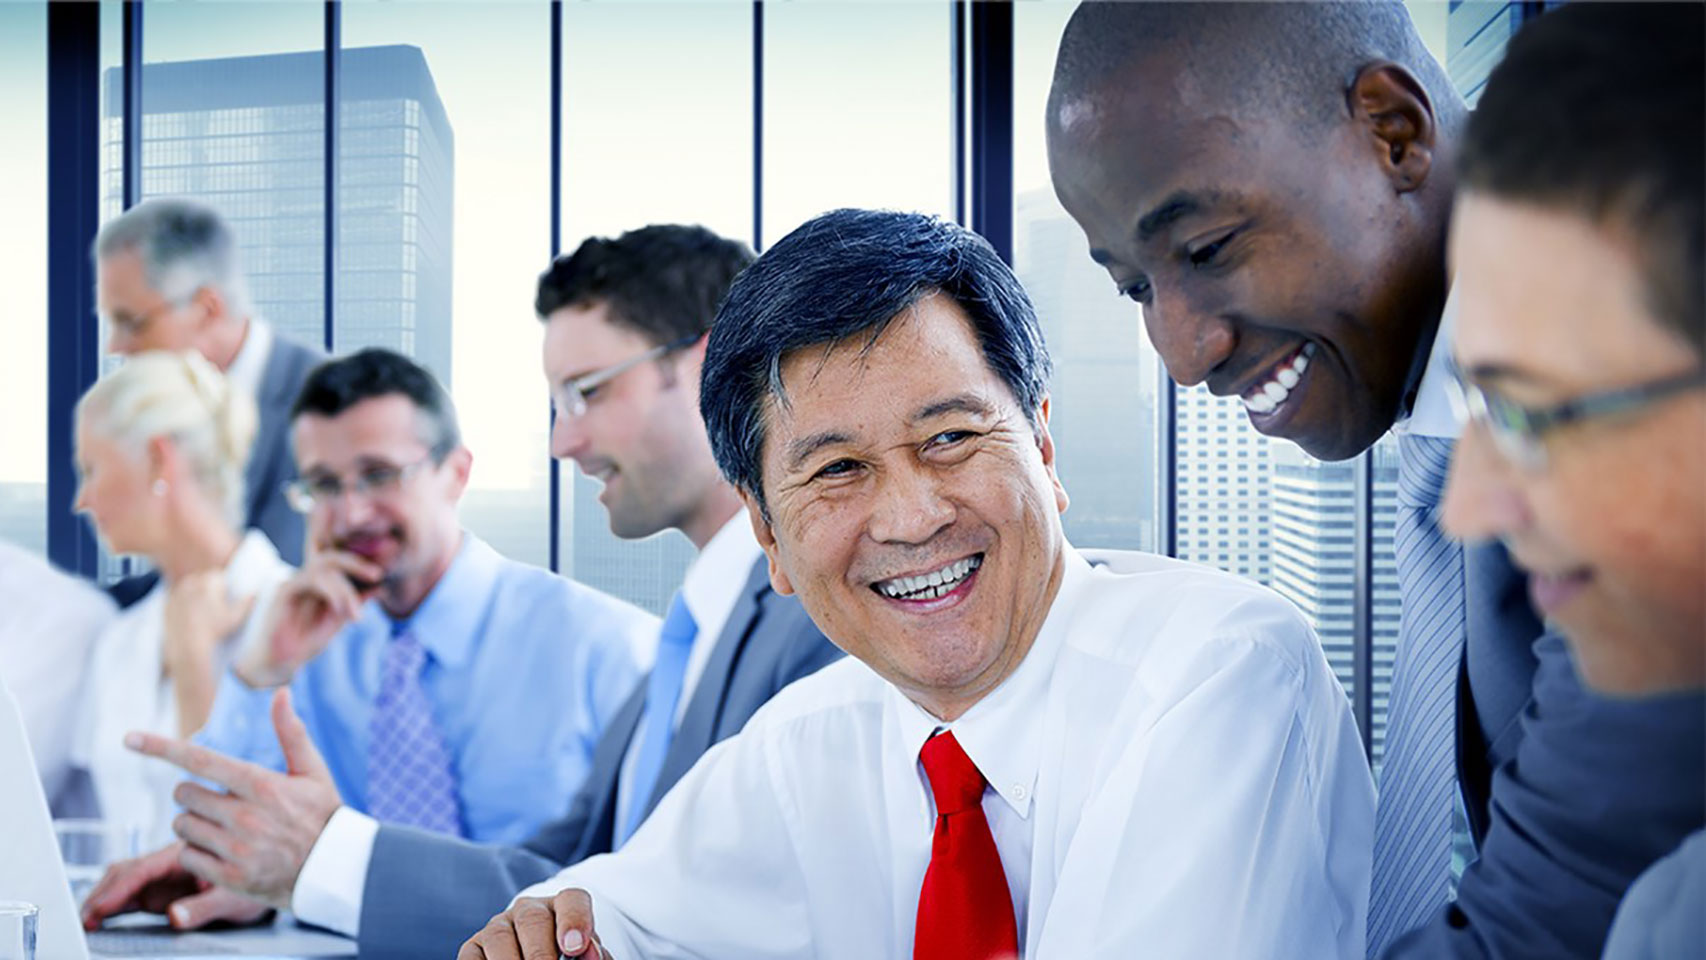 Businessman smiling at a peer in a group setting